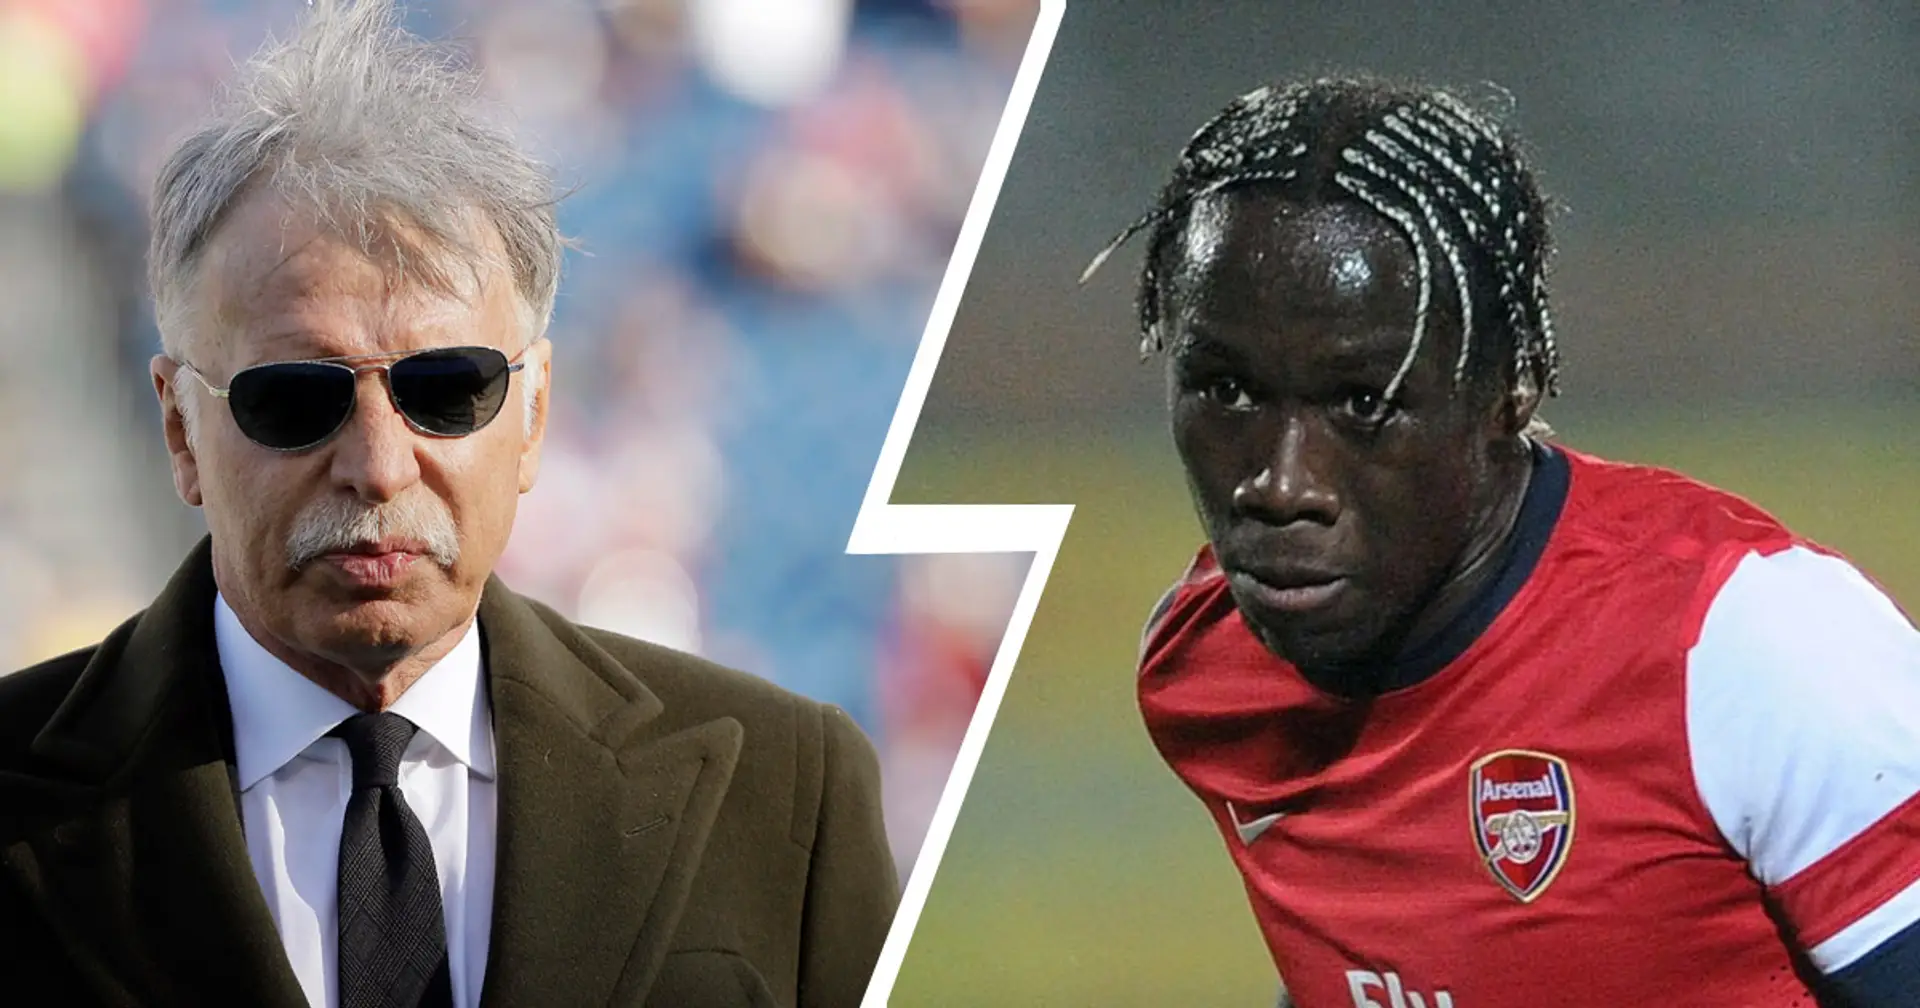 Sagna clarifies his 'circus' comments as he fires shot at Kroenke: 'The club could be much higher'